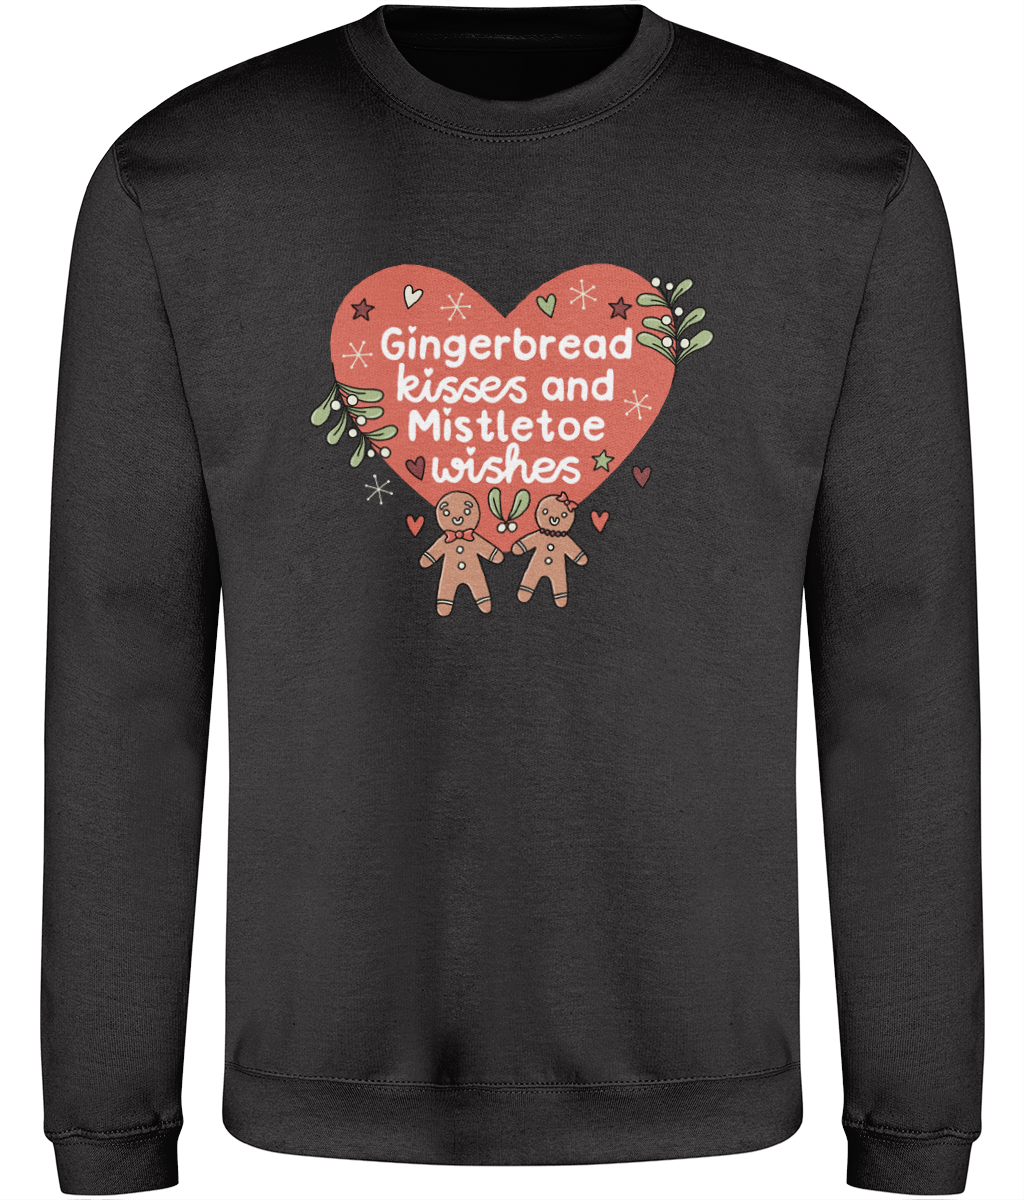 Gingerbread Kisses and Mistletoe Wishes - Adult Sweatshirt - Multi Colour Available